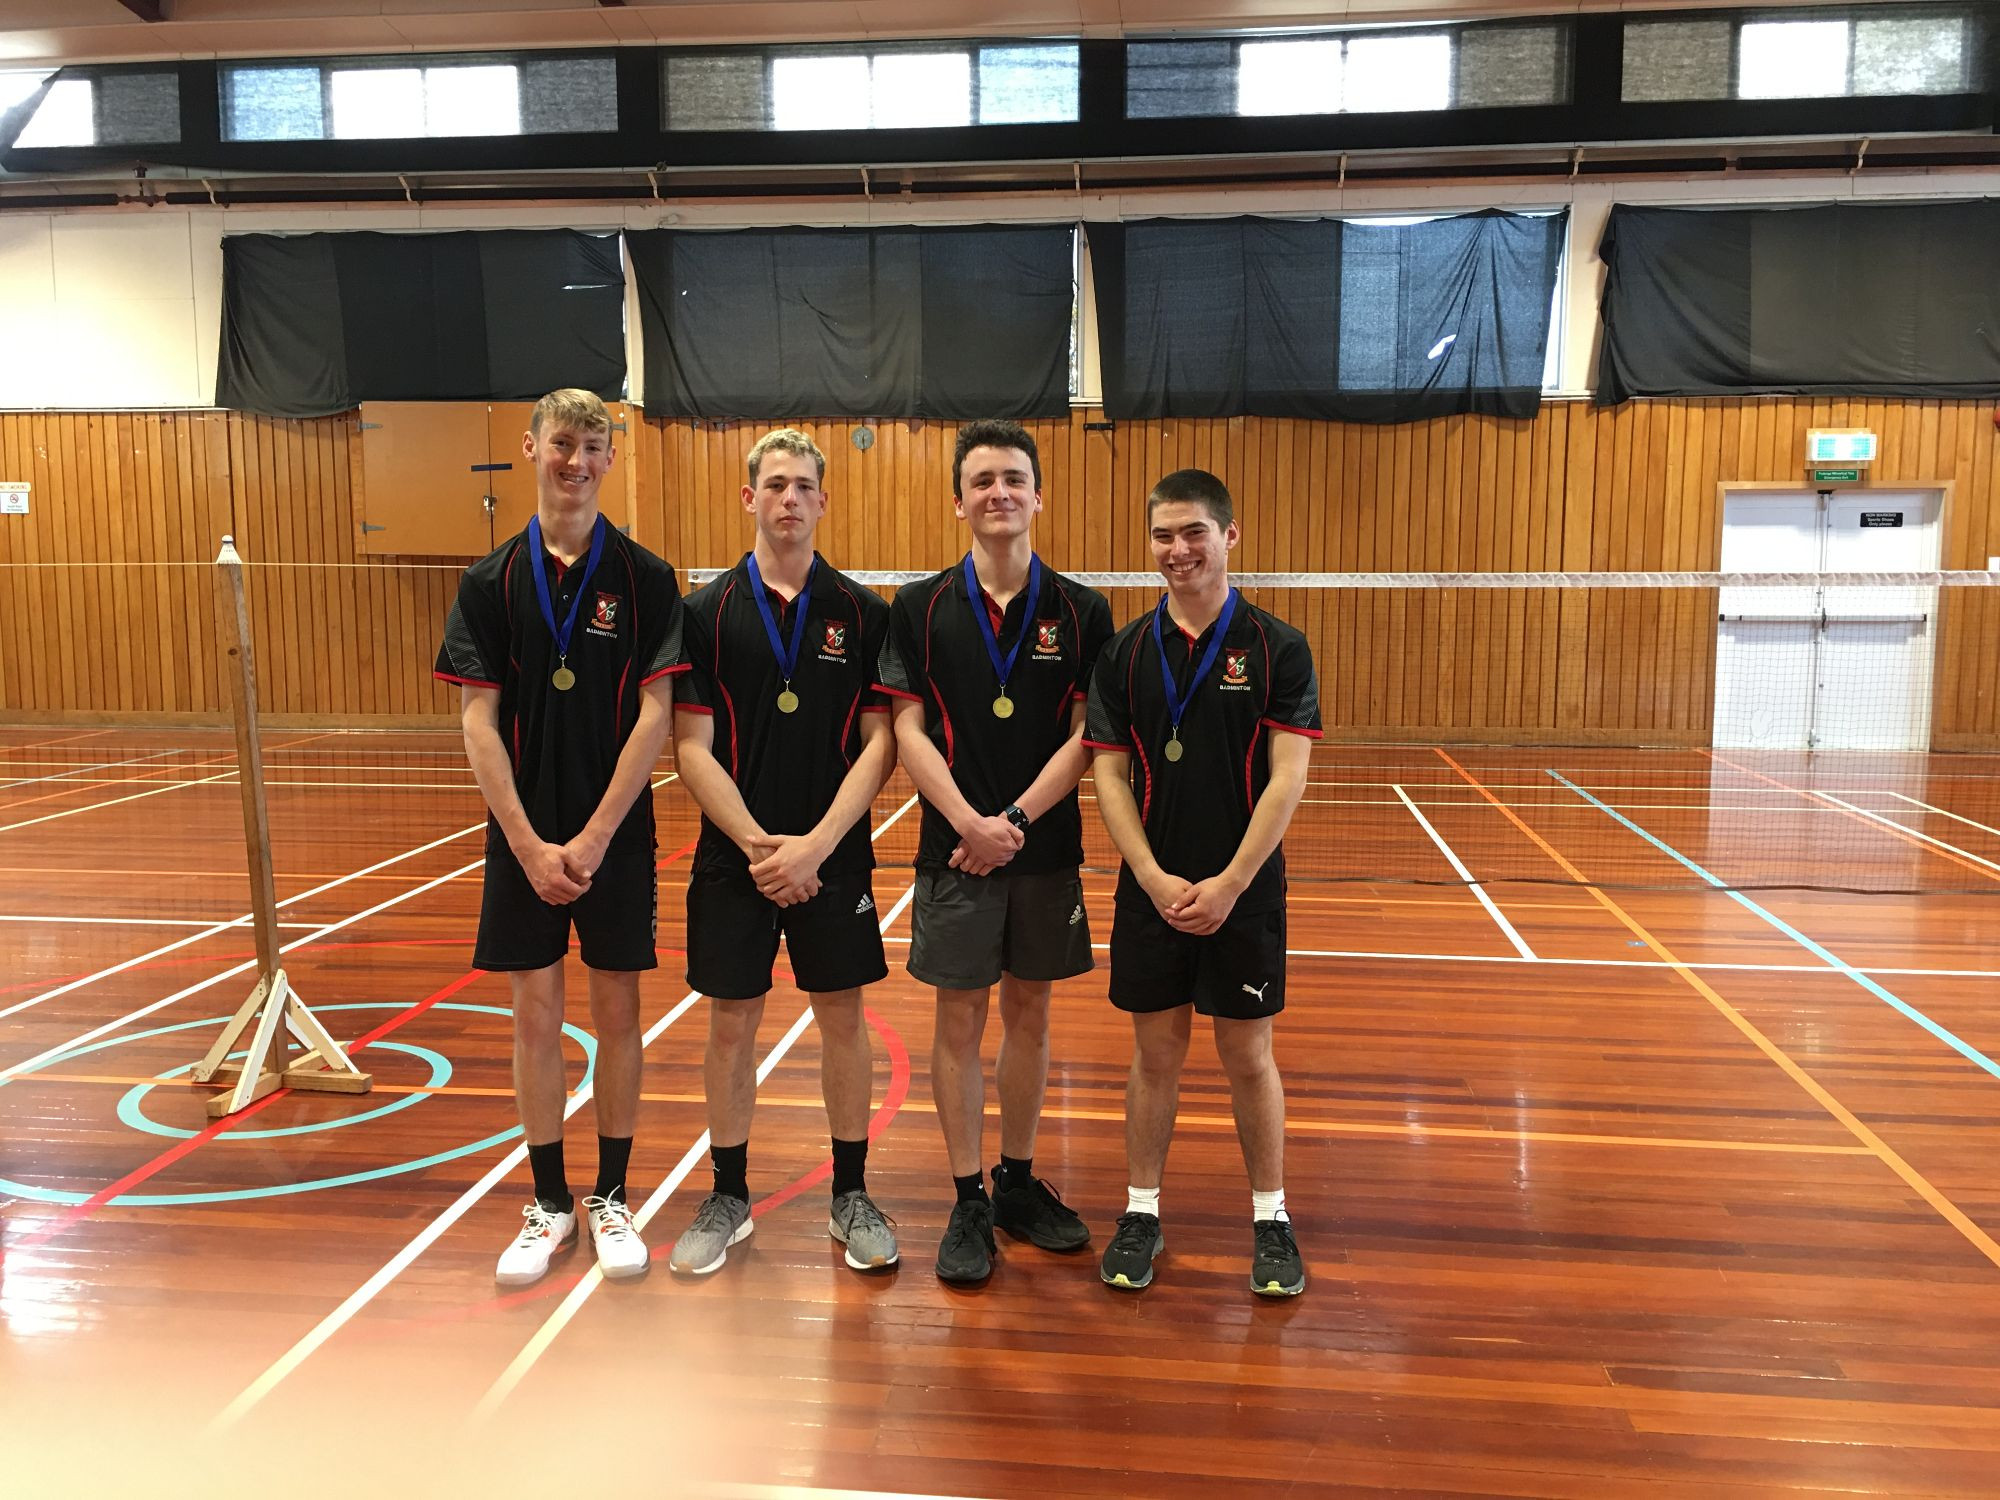 More medals for Badminton!